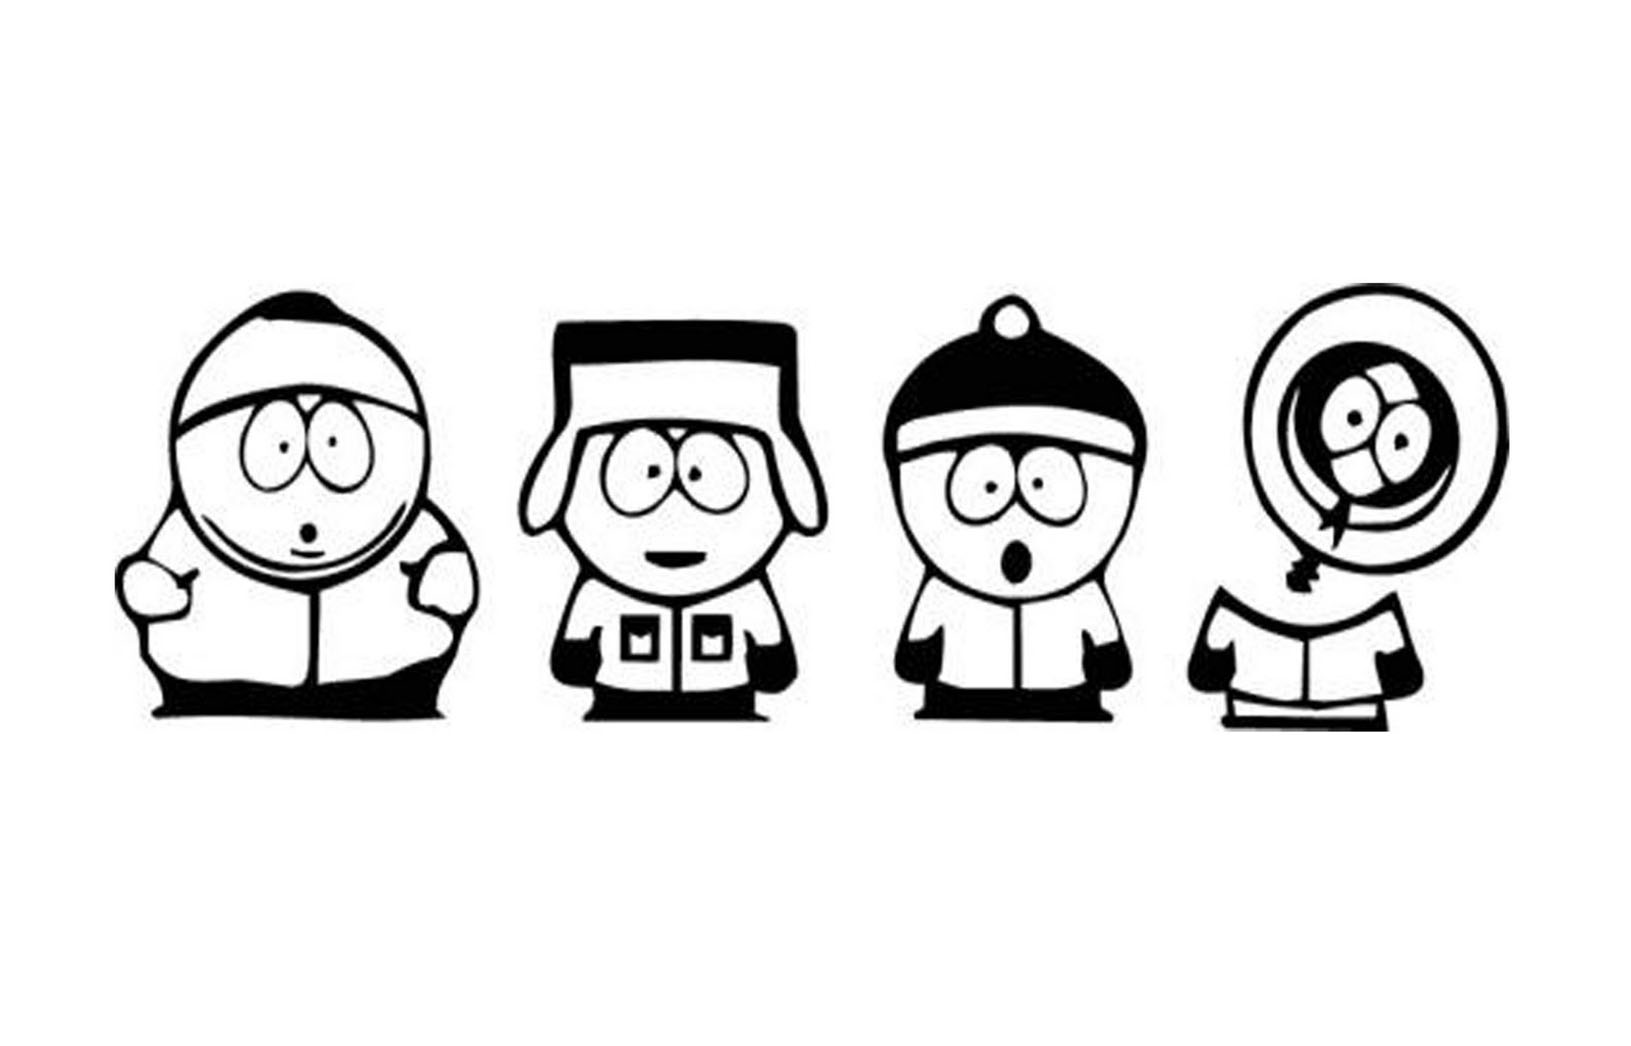 The 4 friends of South Park